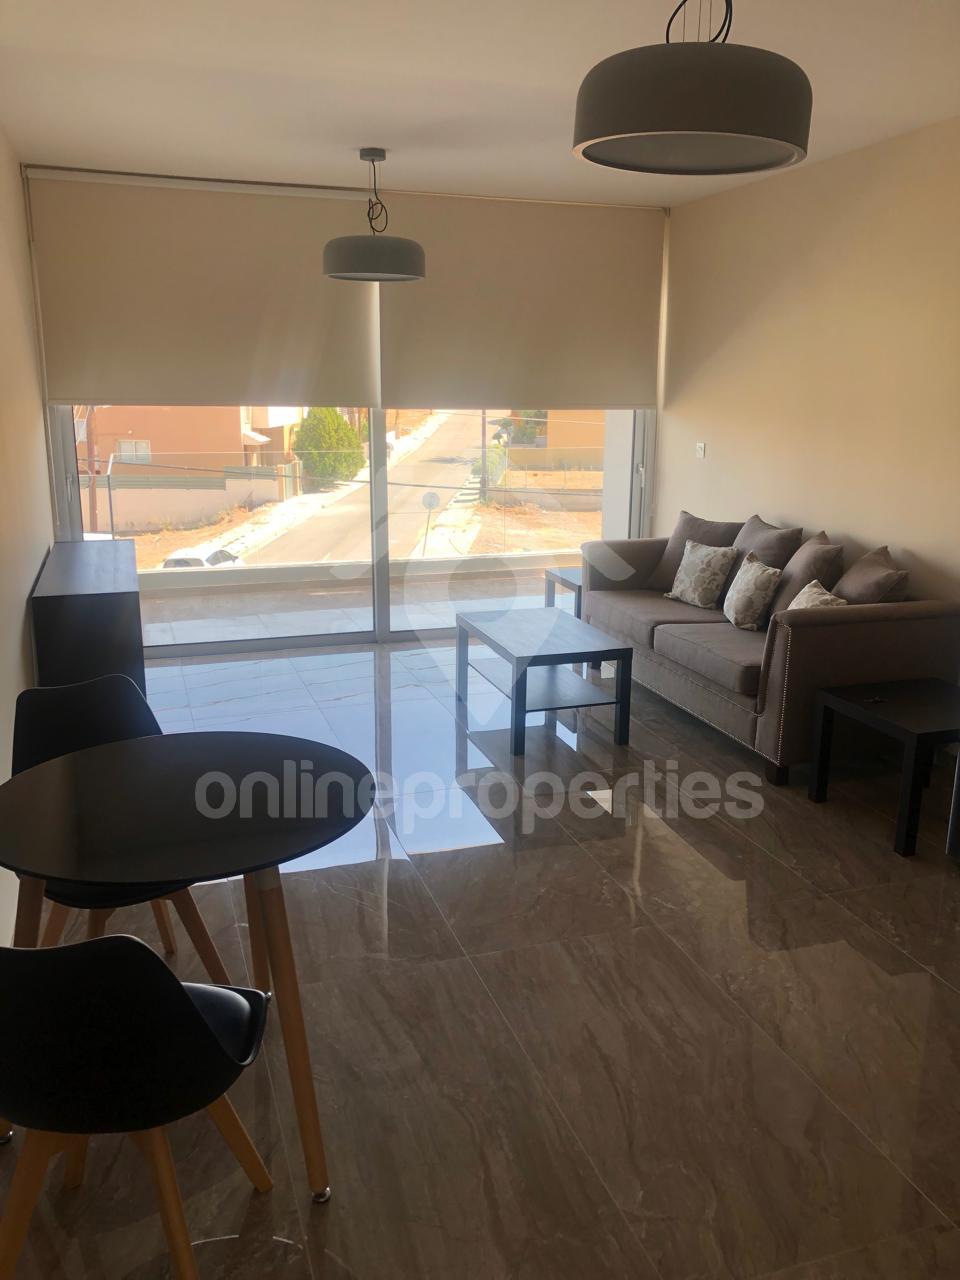 Nicely furnished one bedroom apartment near the Uniuversity of Cyprus